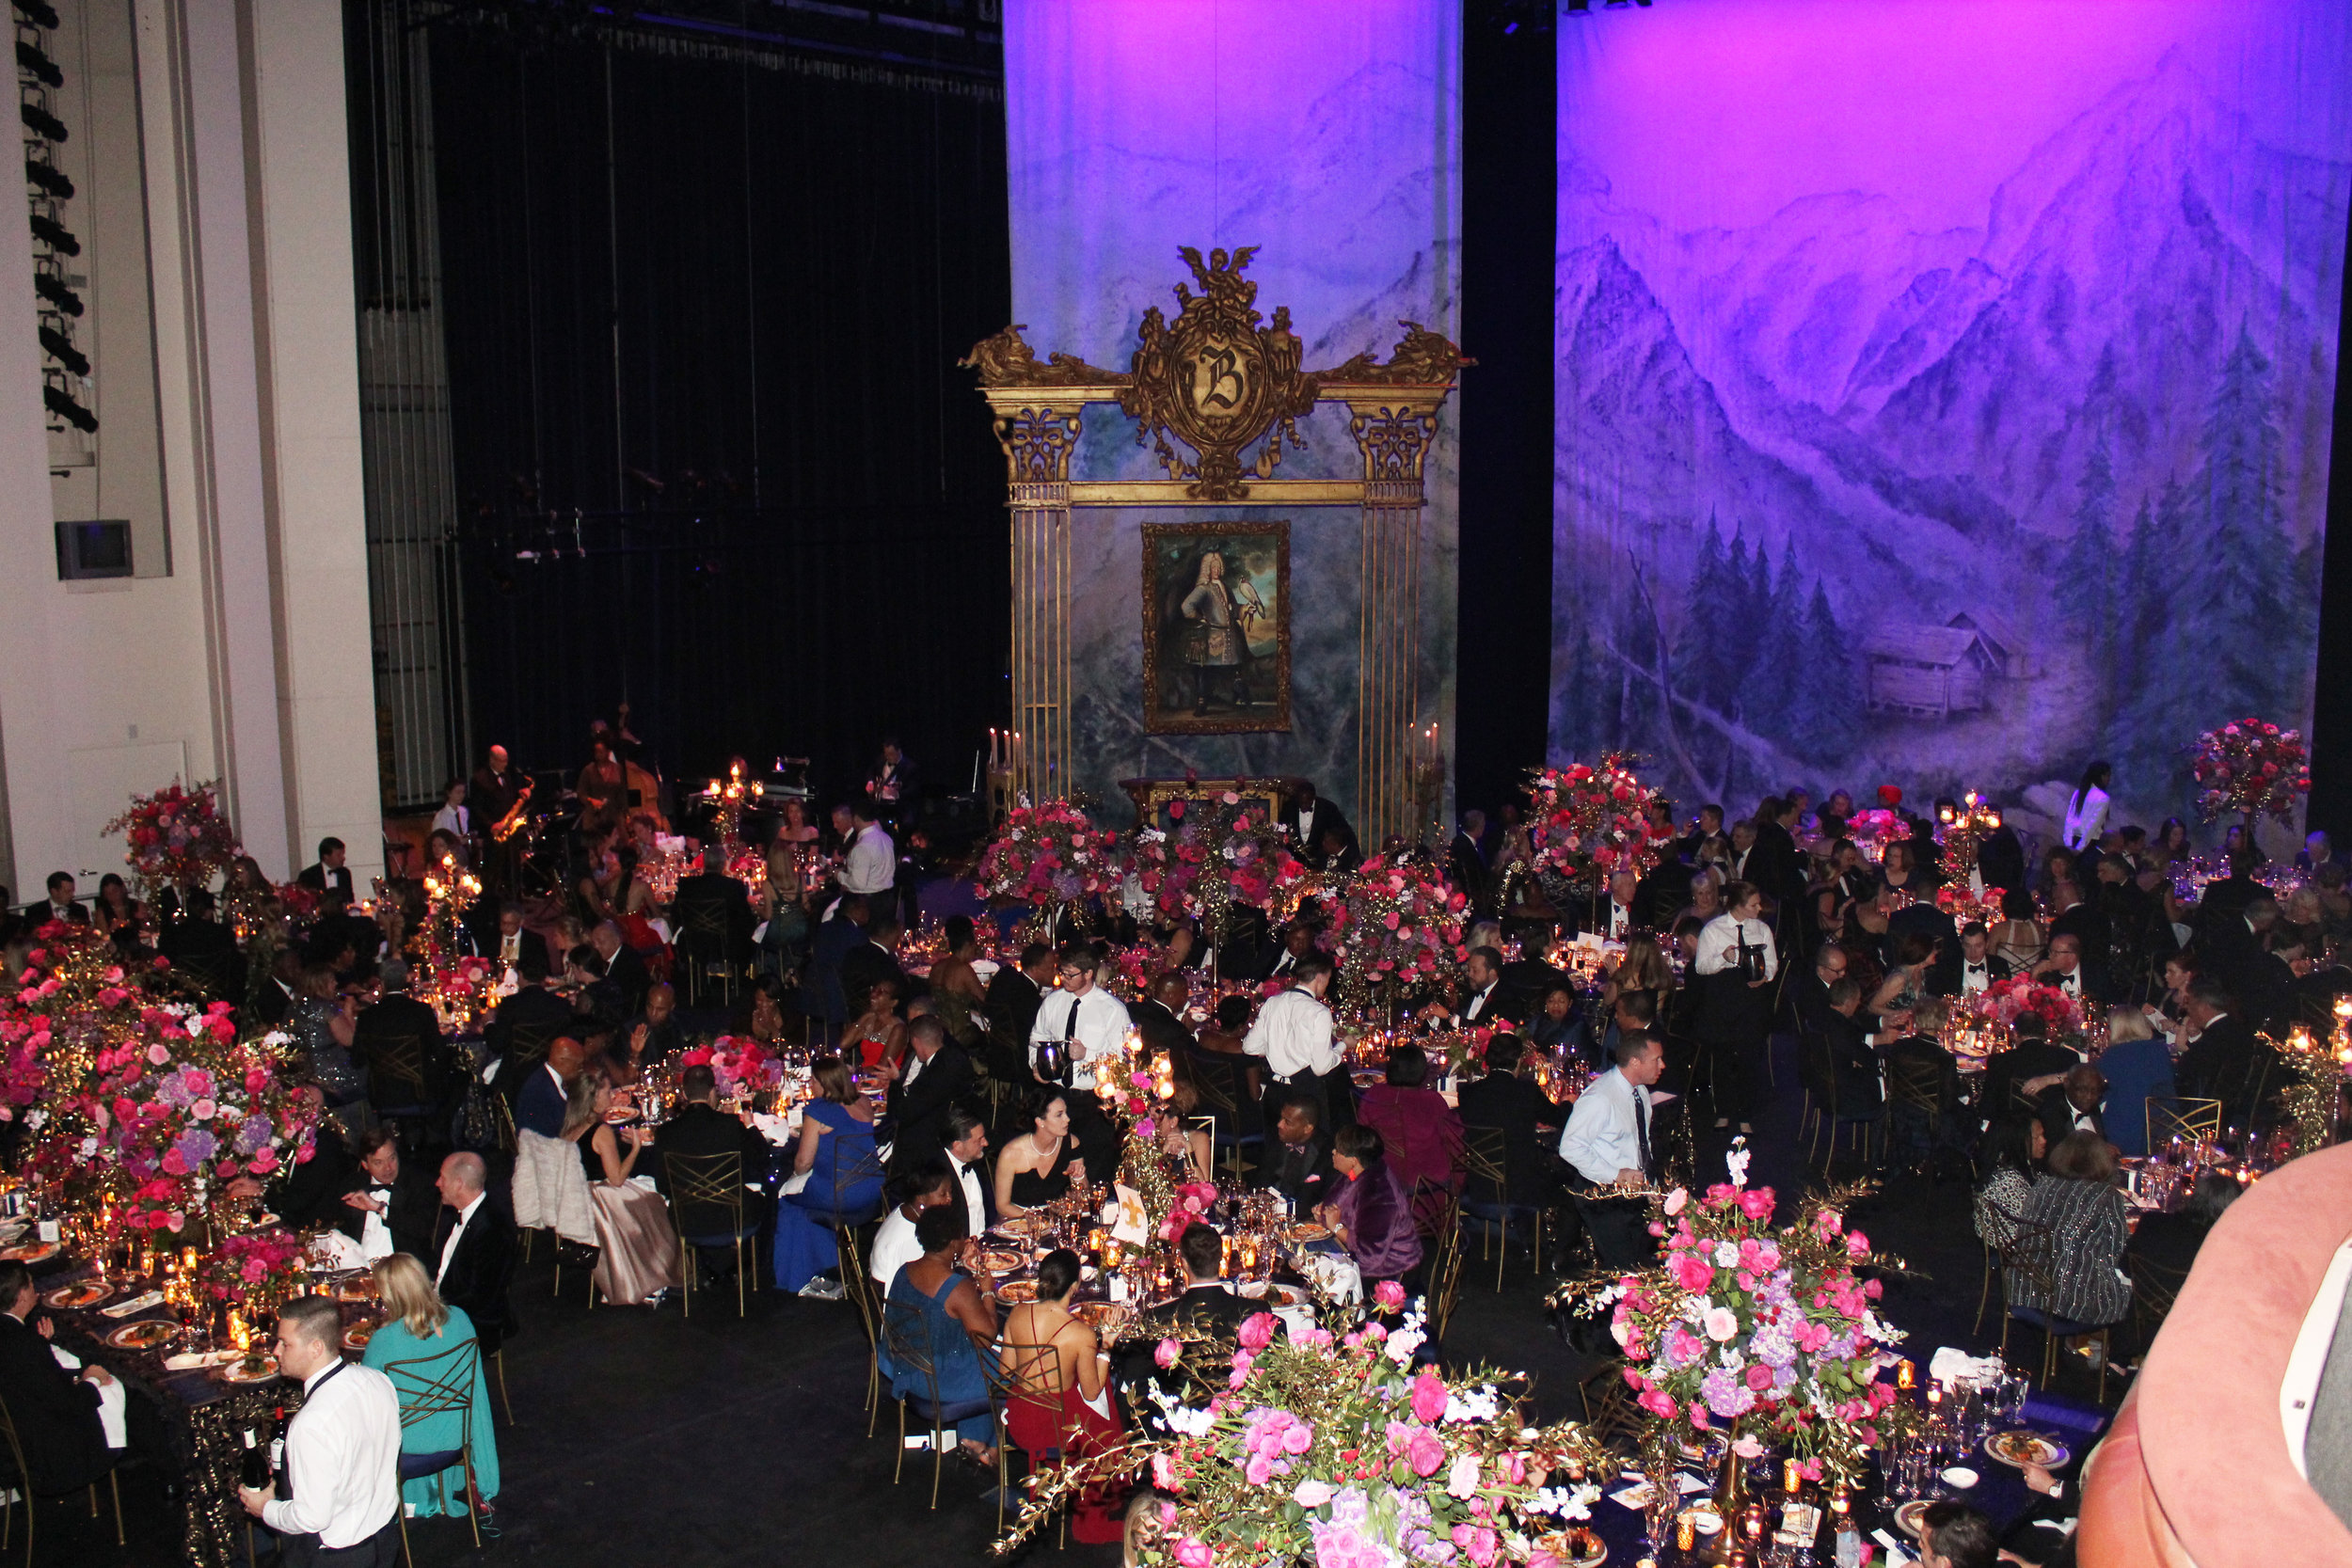  Gorgeous decor from John Lupton Events amid the scenery for Opera Carolina’s season opening production of Donizetti’s  Daughter of the Regiment  